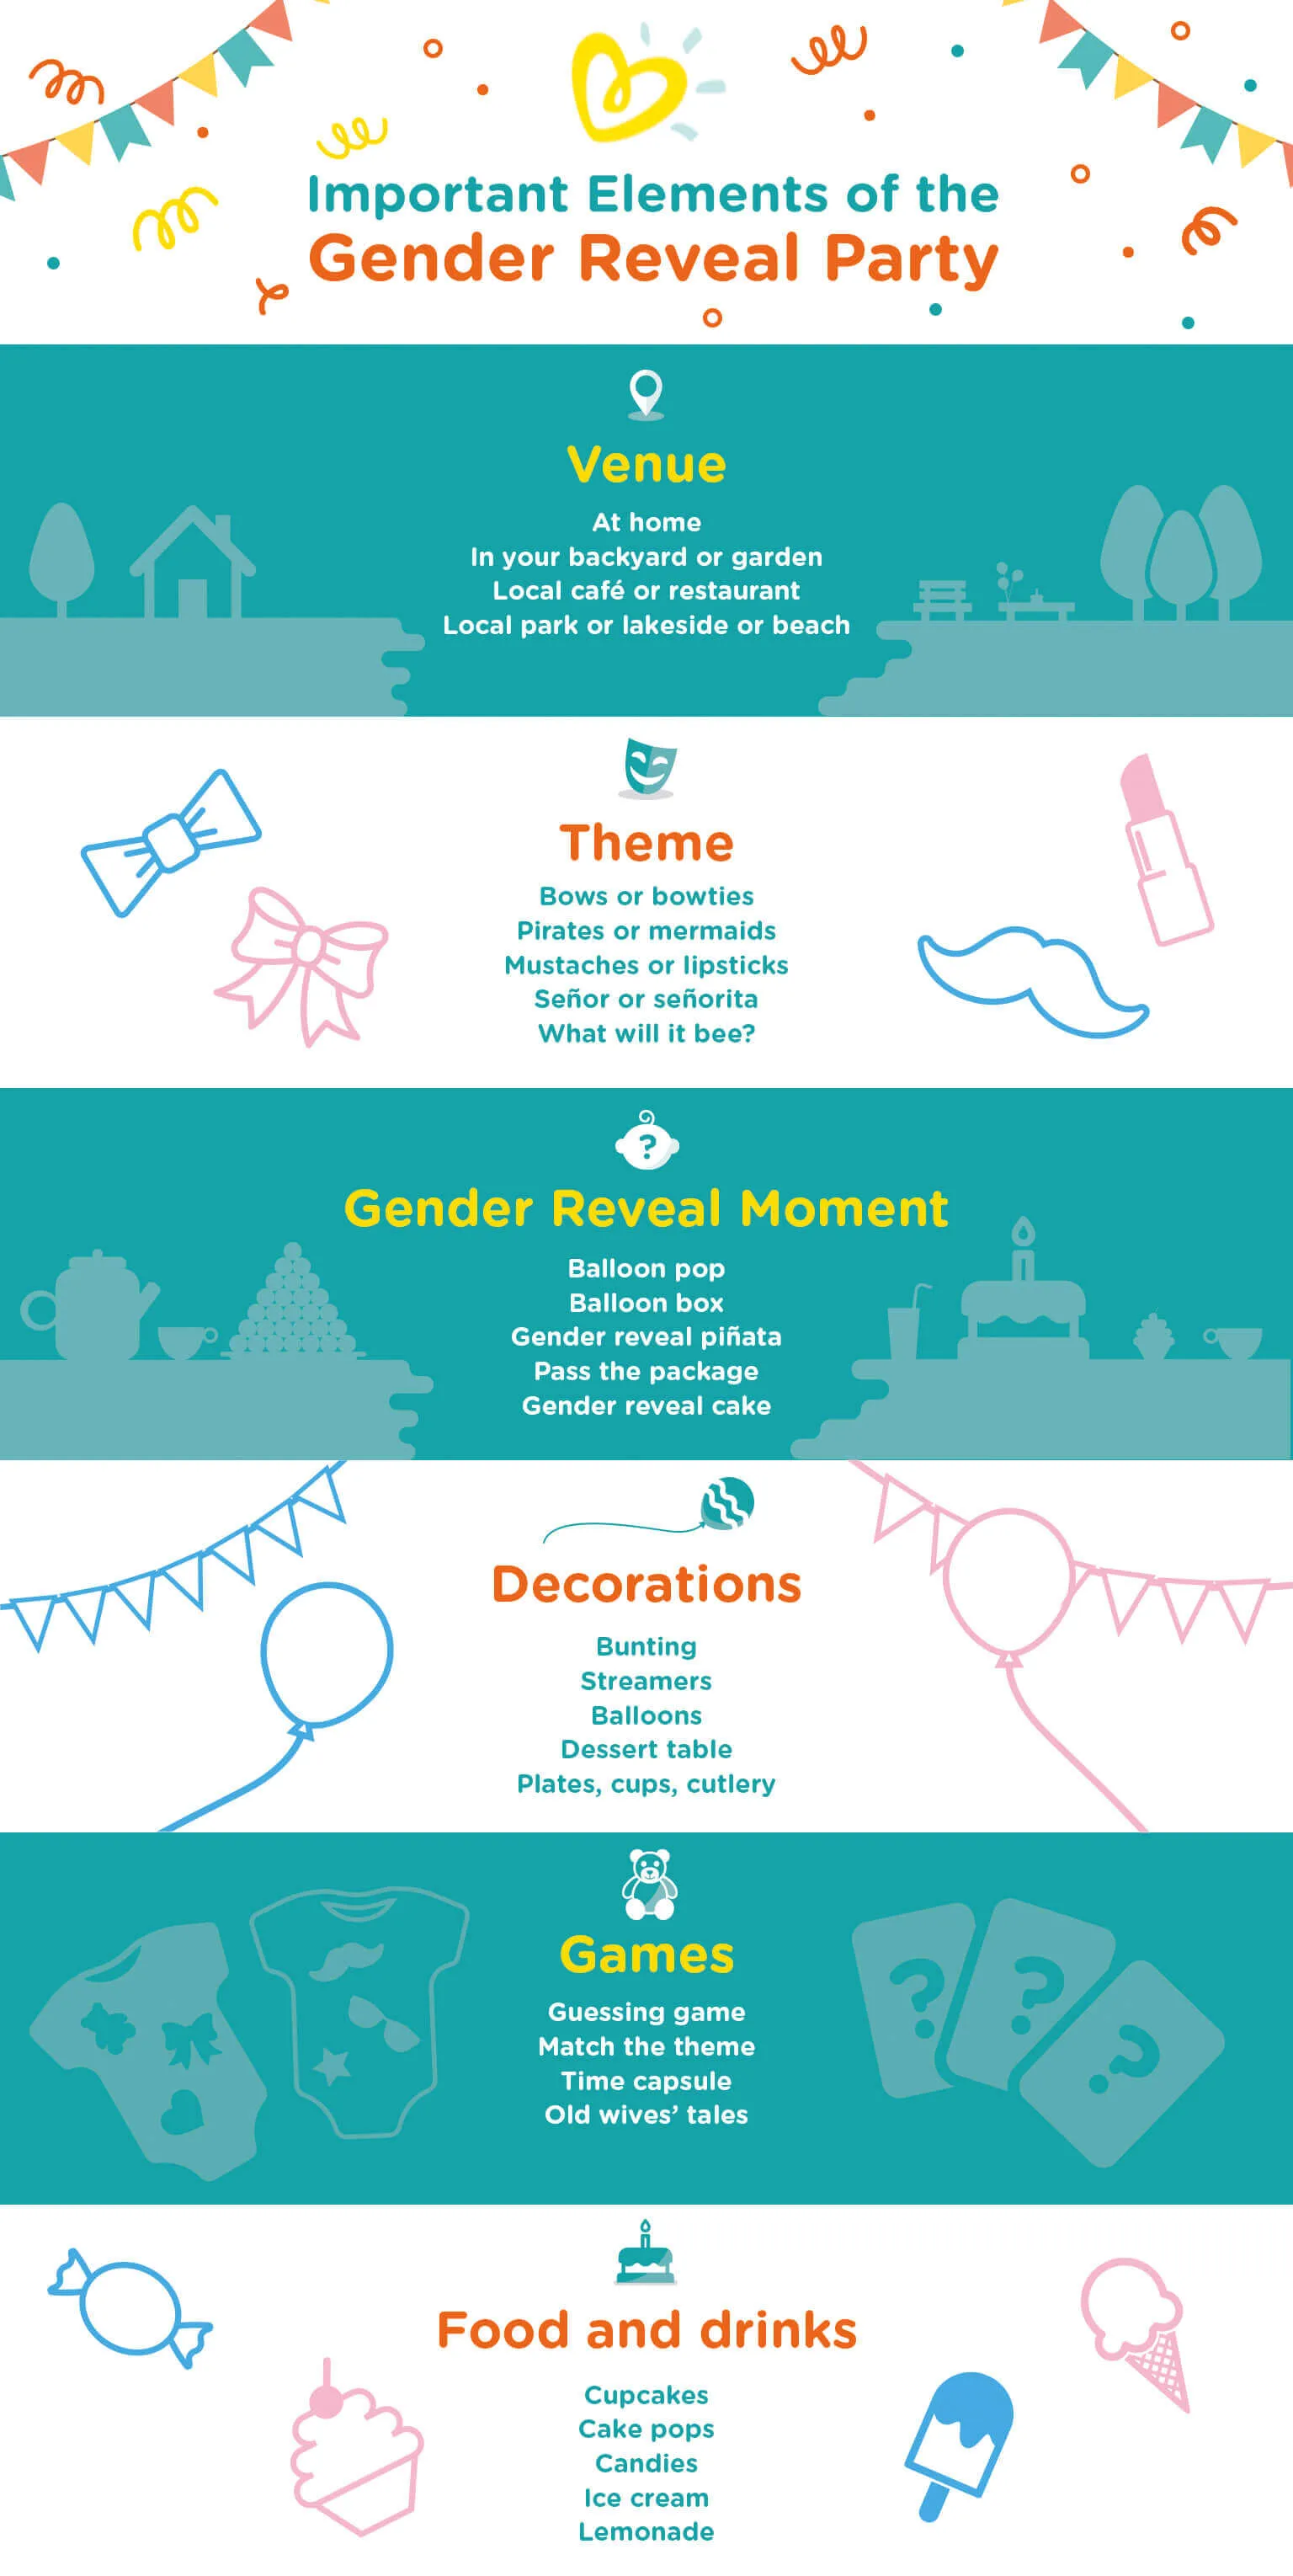 7 Must-Do Gender Reveal Party Ideas